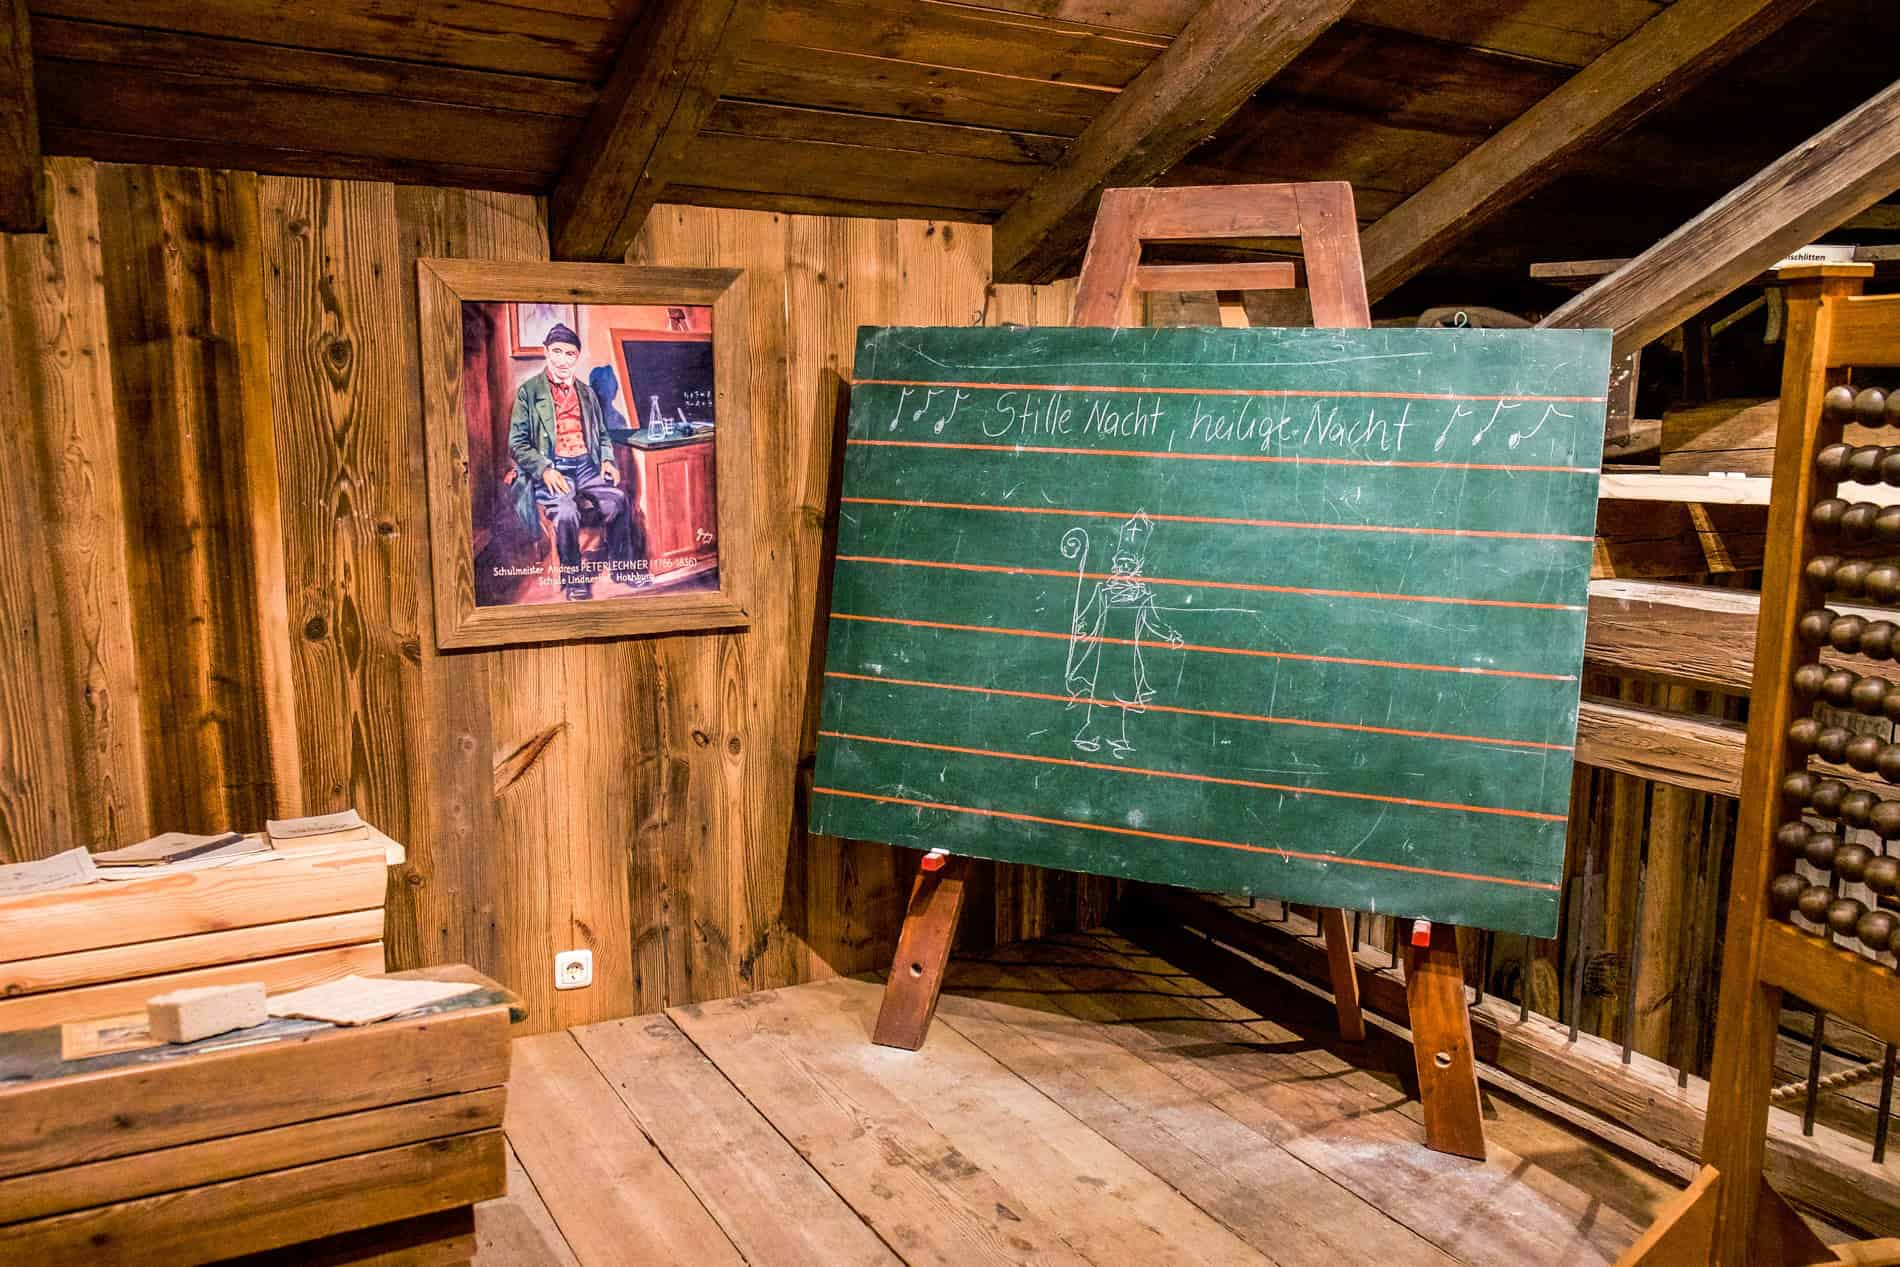 A wall portrait and green school chalk board inside a wooden house belonging to Silent Night Composer, Franz Xaver Gruber.